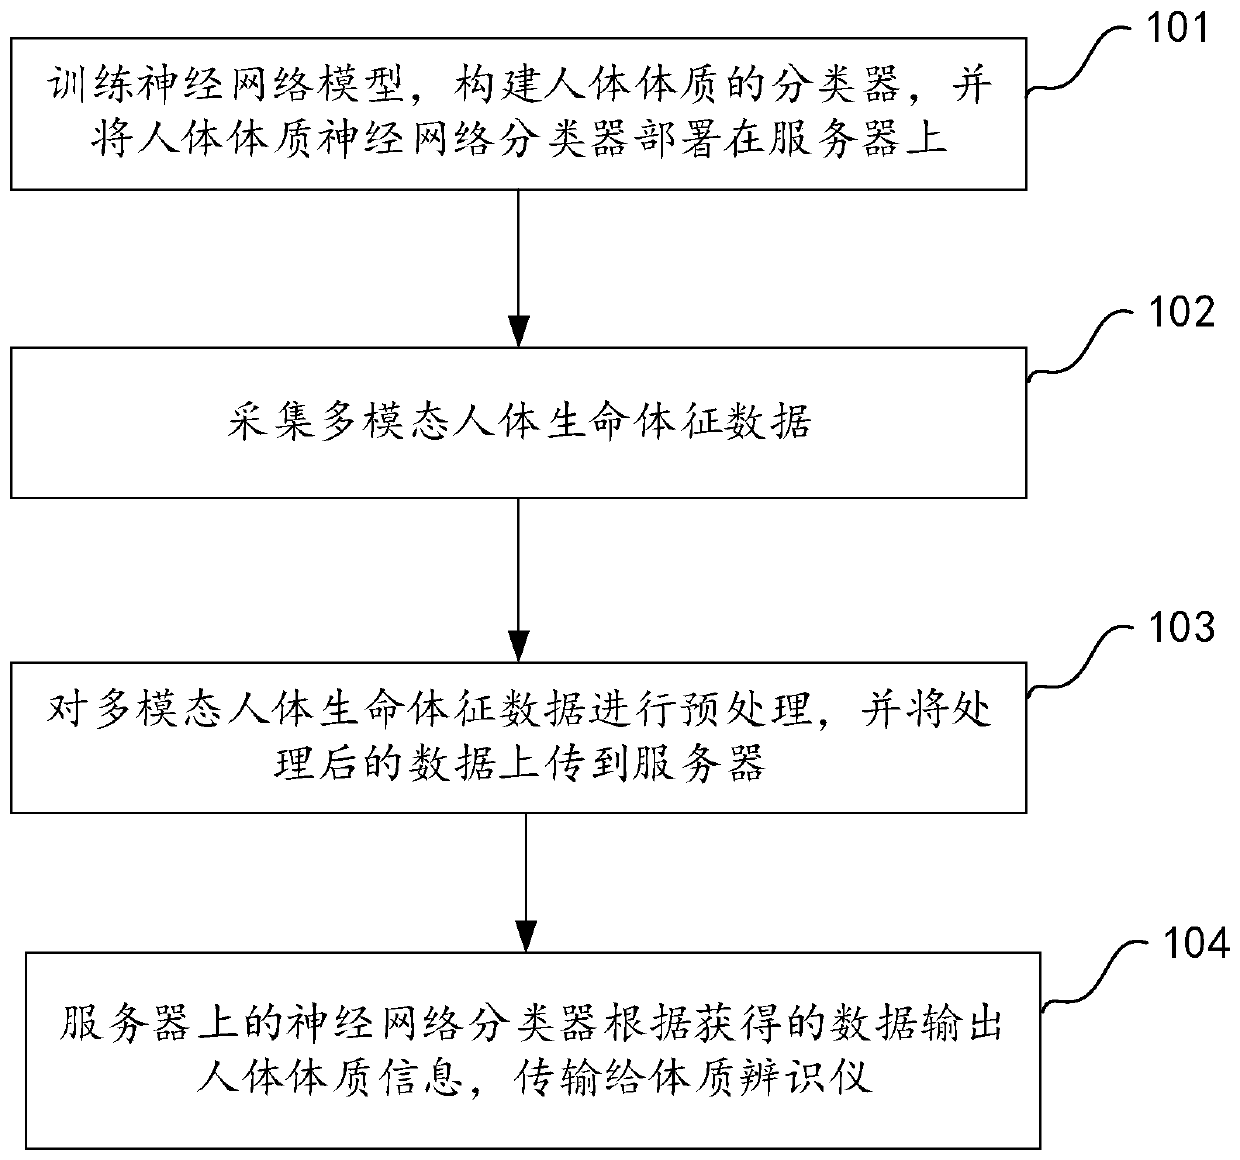 Human body constitution recognition method and system based on neural network classifier